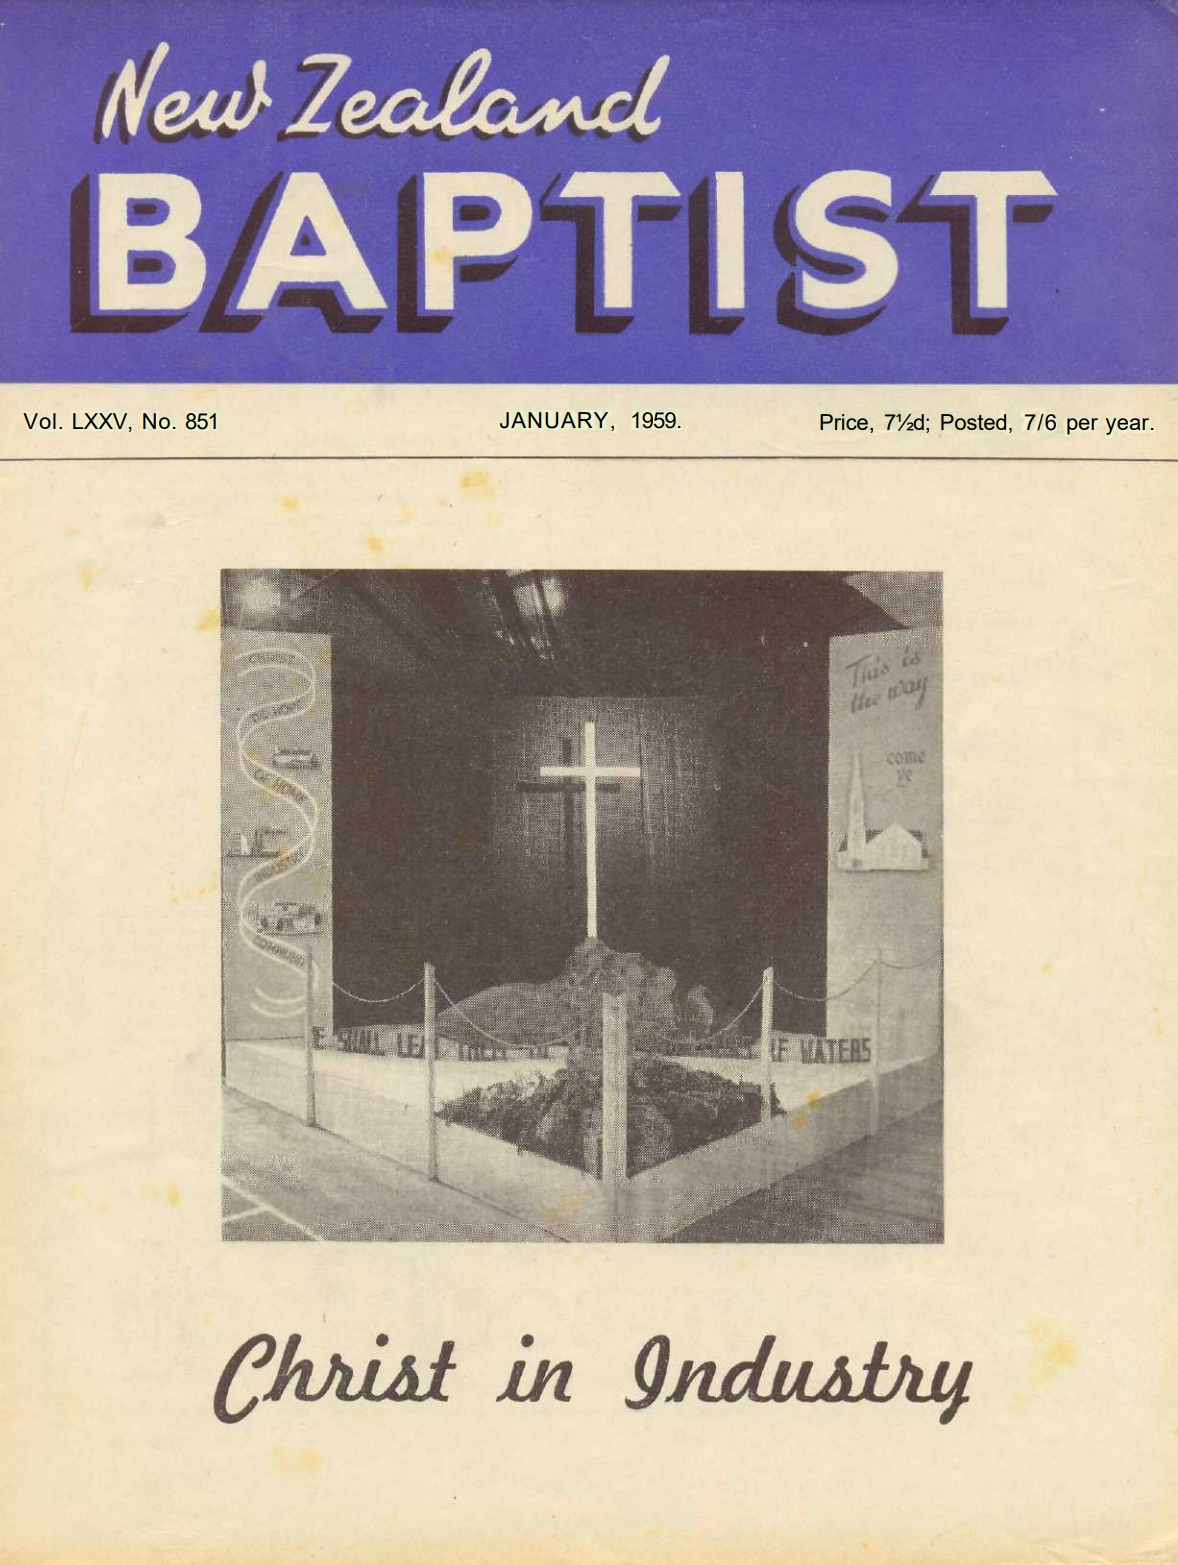 an issue of New Zealand Baptist